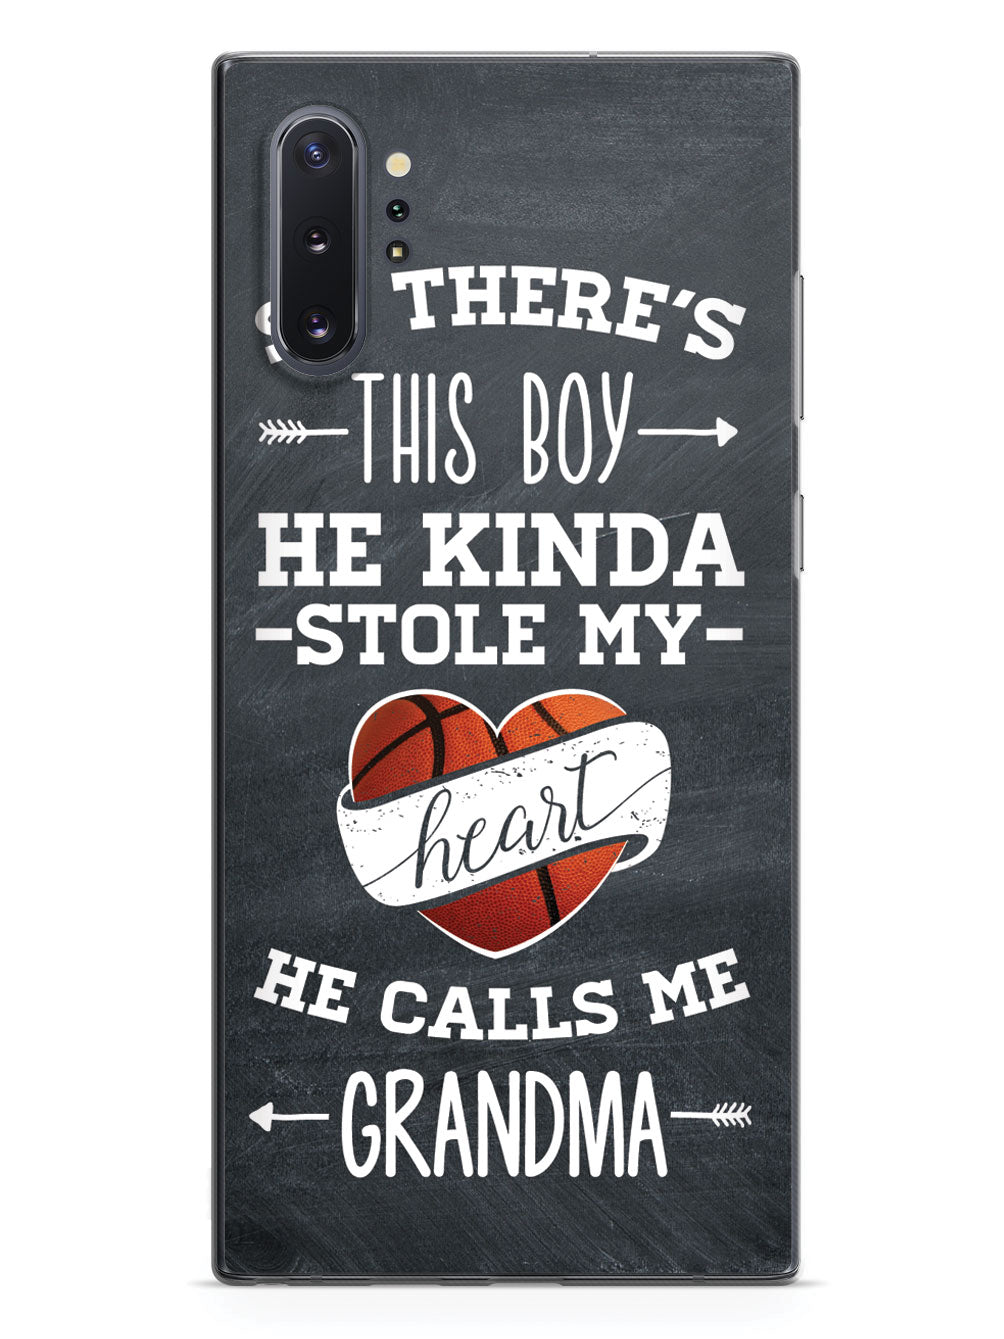 So there's this Boy - Basketball Player - Grandma Case